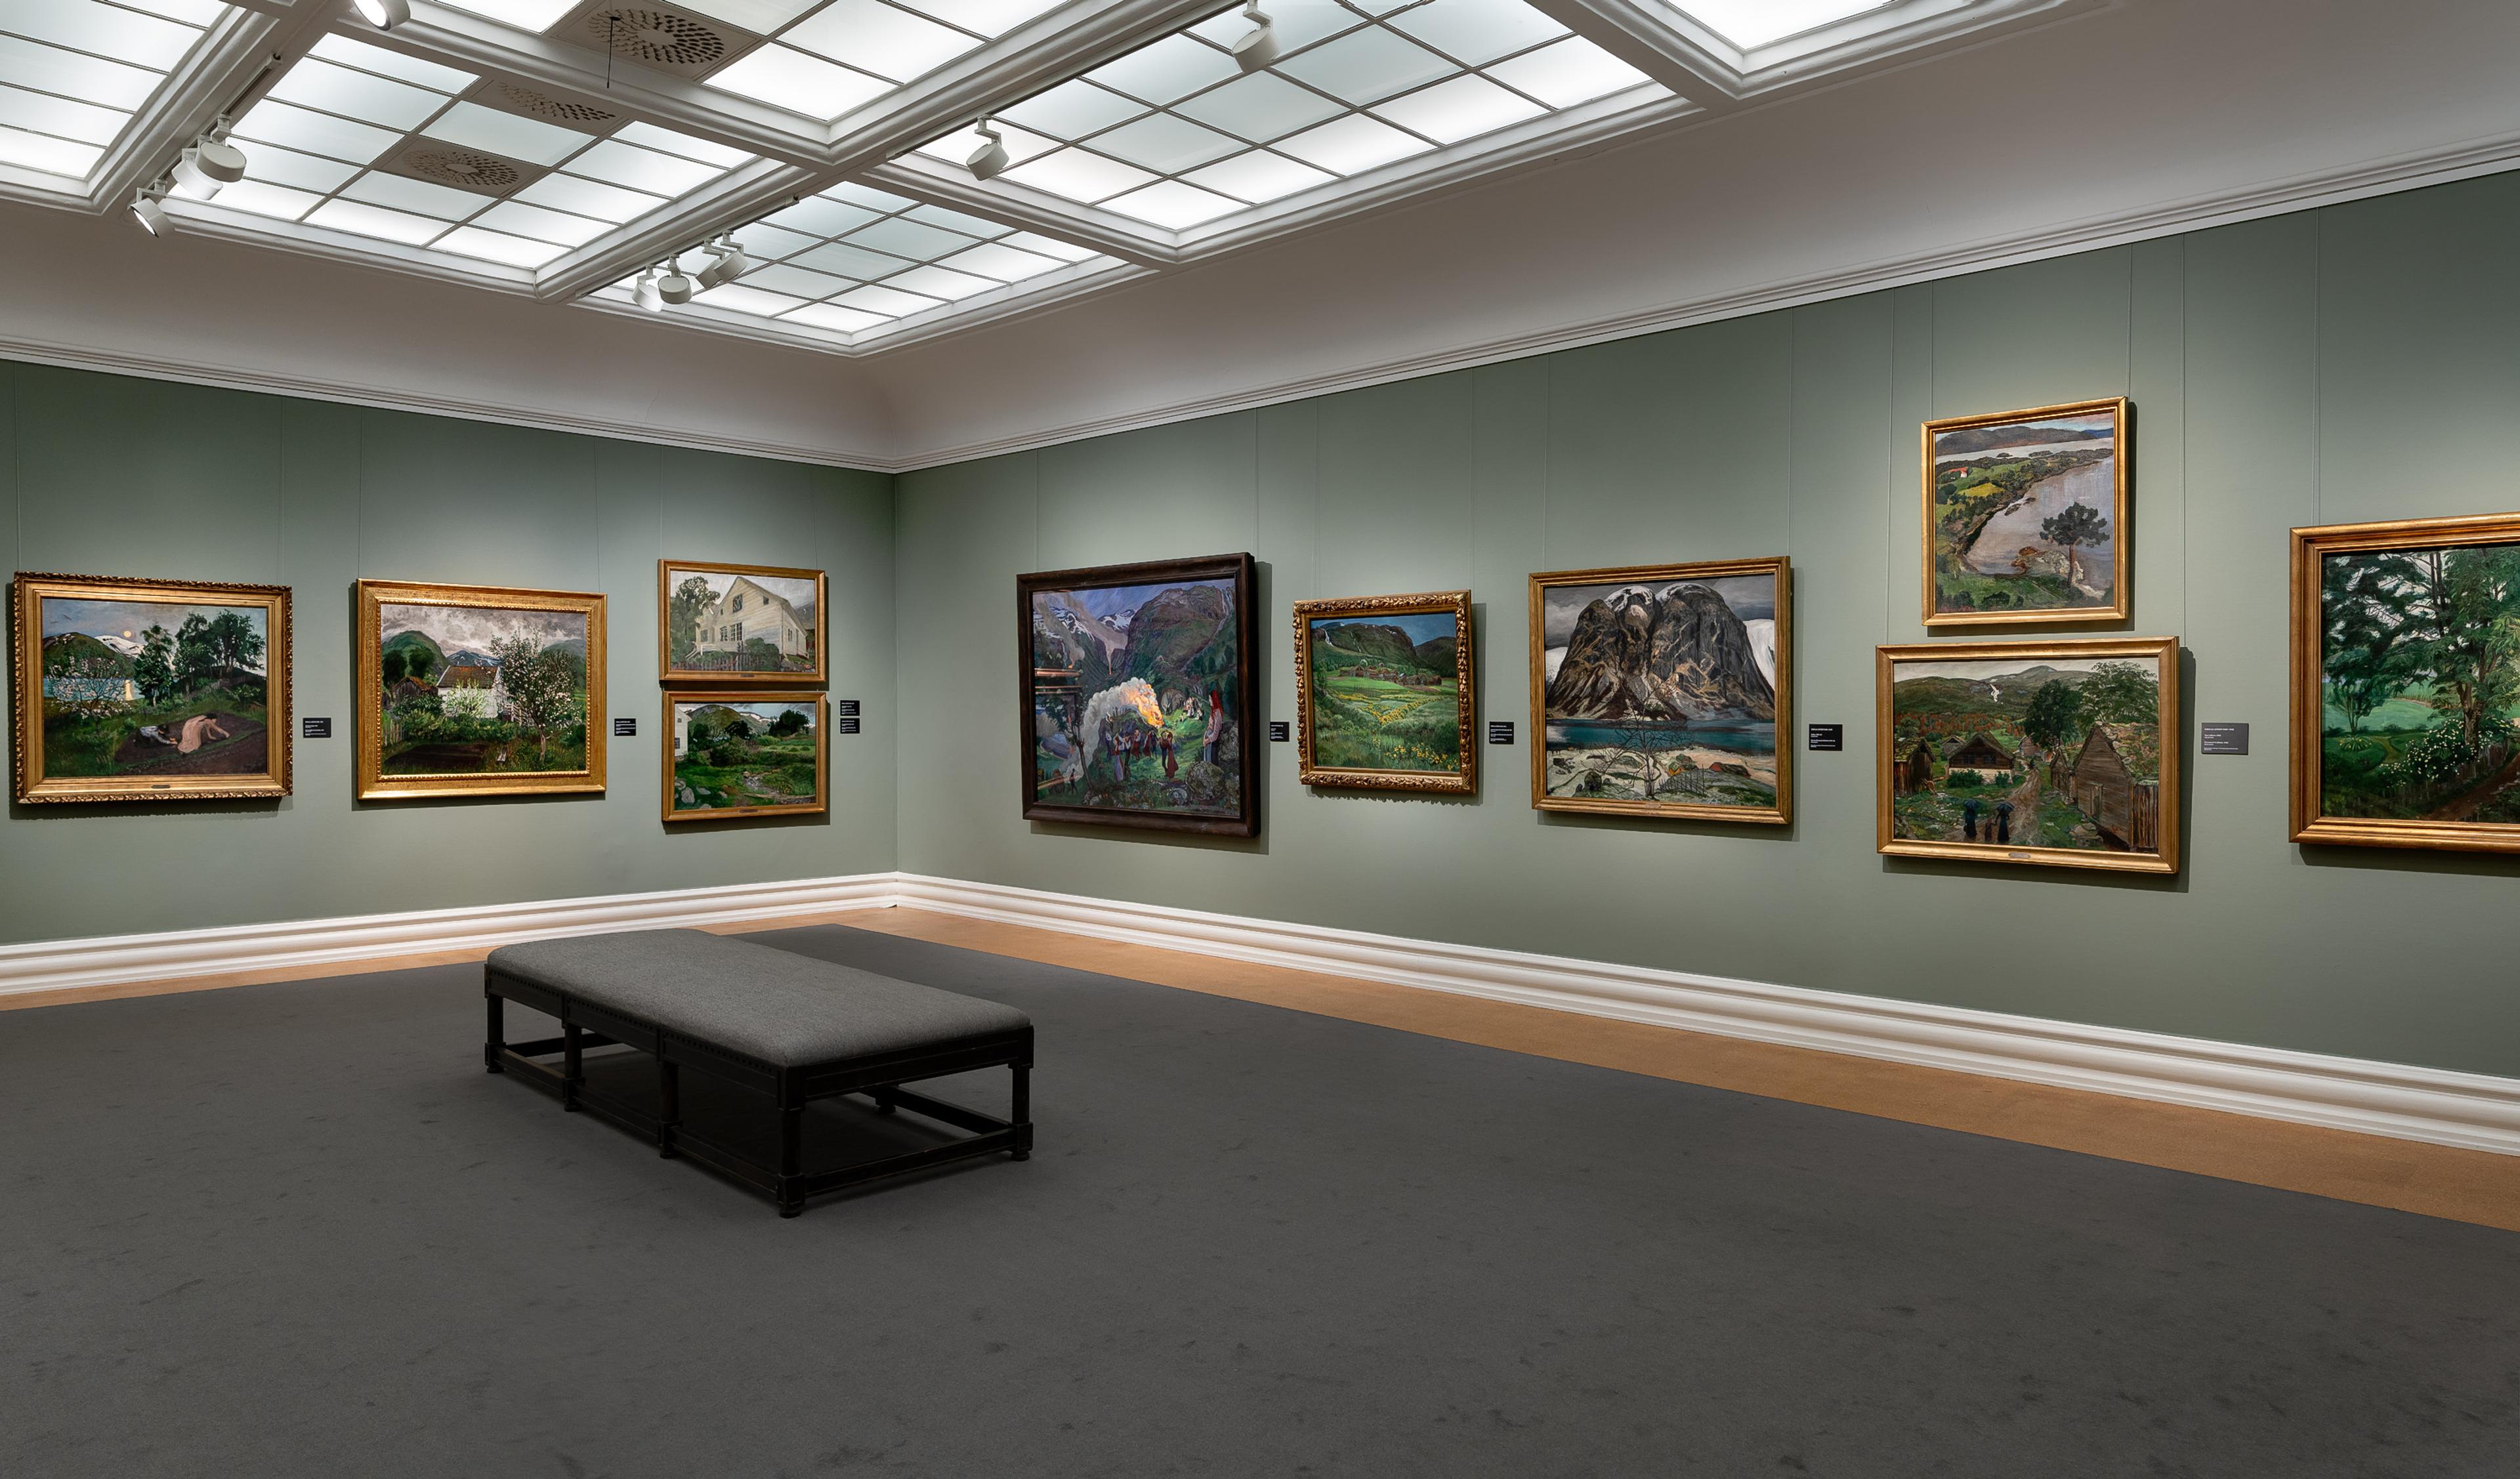 An exhibition room featuring paintings by Nikolai Astrup